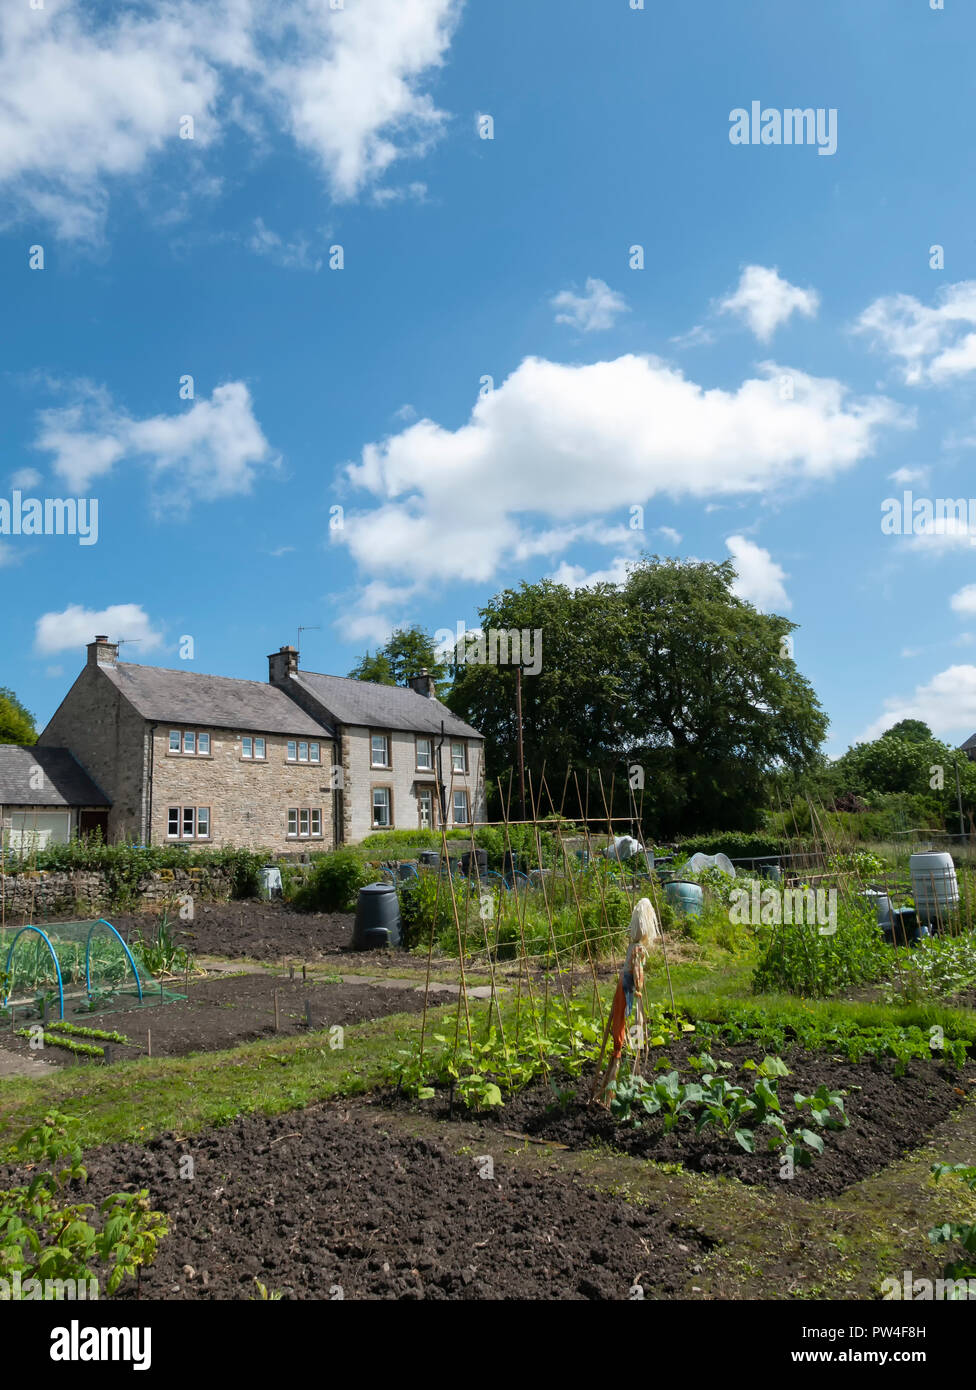 Allotments in Great Longstone, The Peak District National Park, Derbyshire, England. Stock Photo